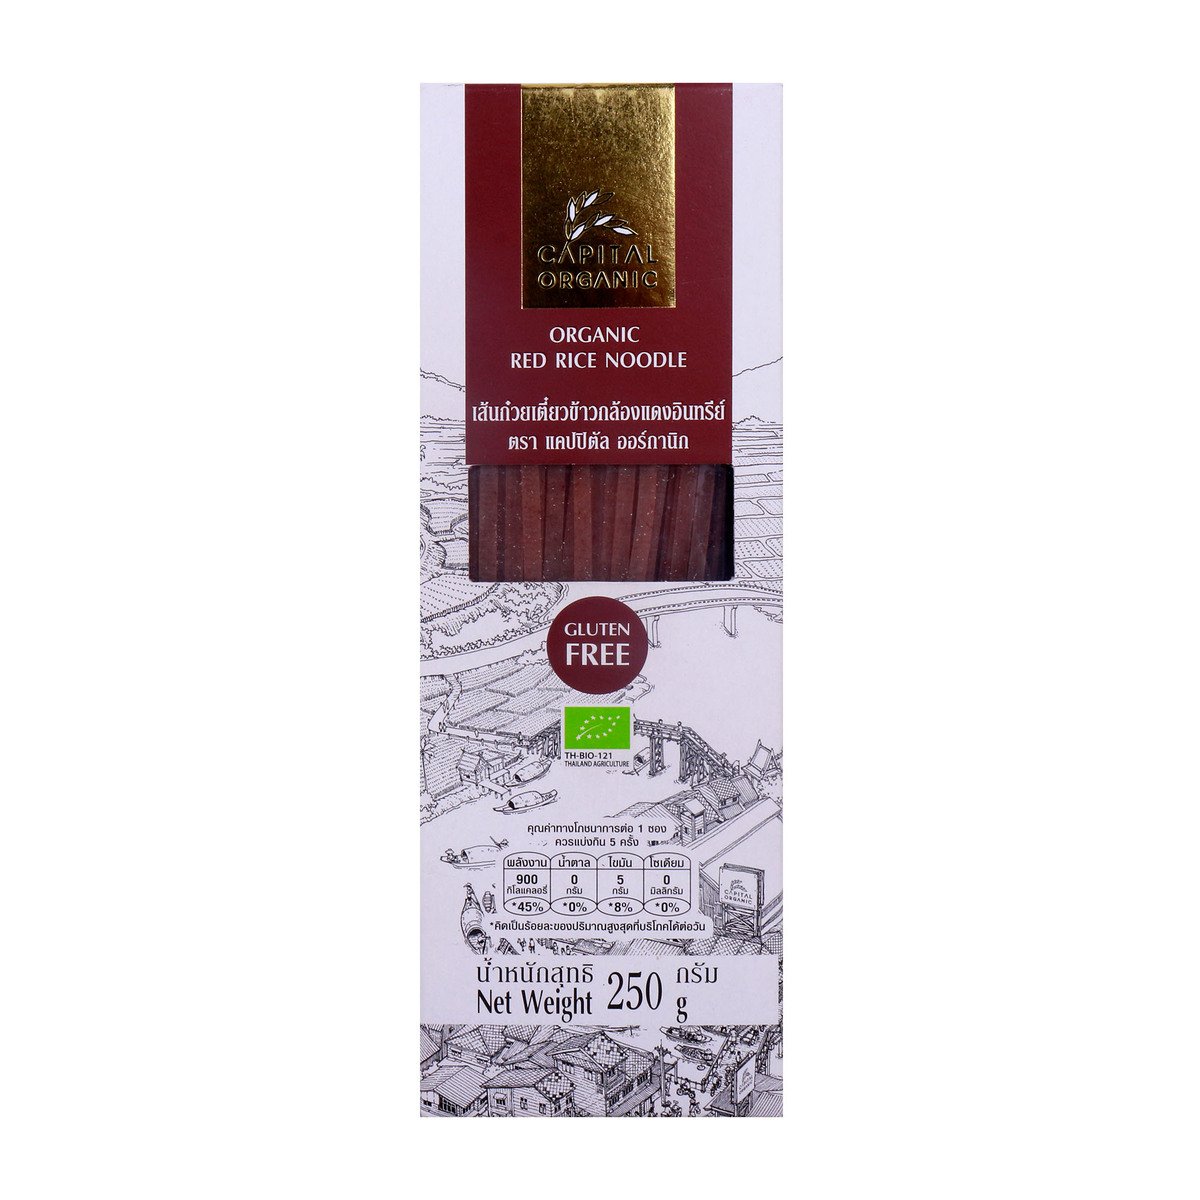 Capital Organic Red Rice Noodle, Gluten Free, 250 g